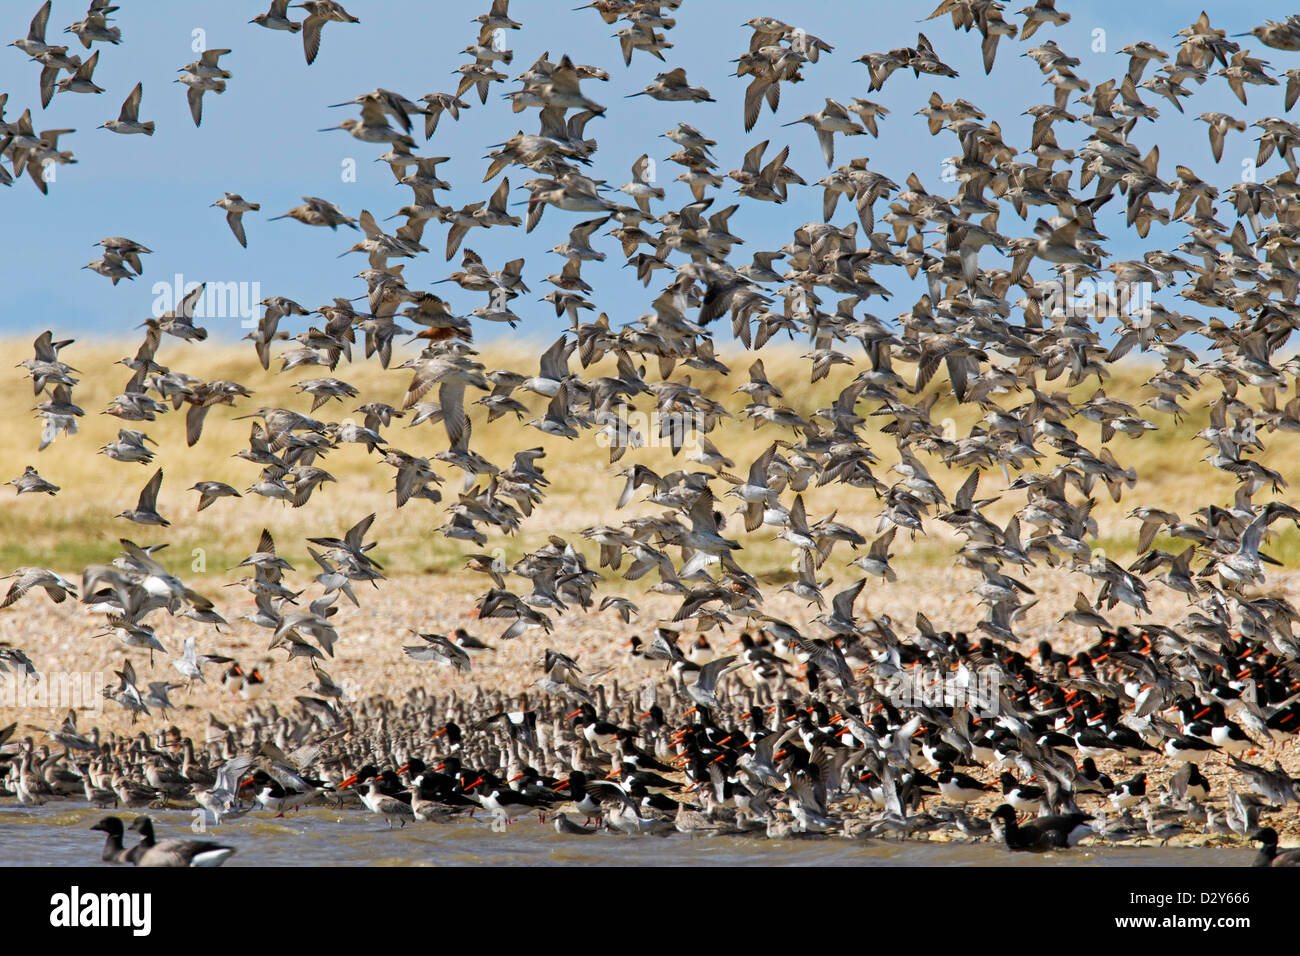 Bar-tailed Godwit (Limosa lapponica) flock in flight at the dunes in the Wadden Sea National Park, Germany Stock Photo